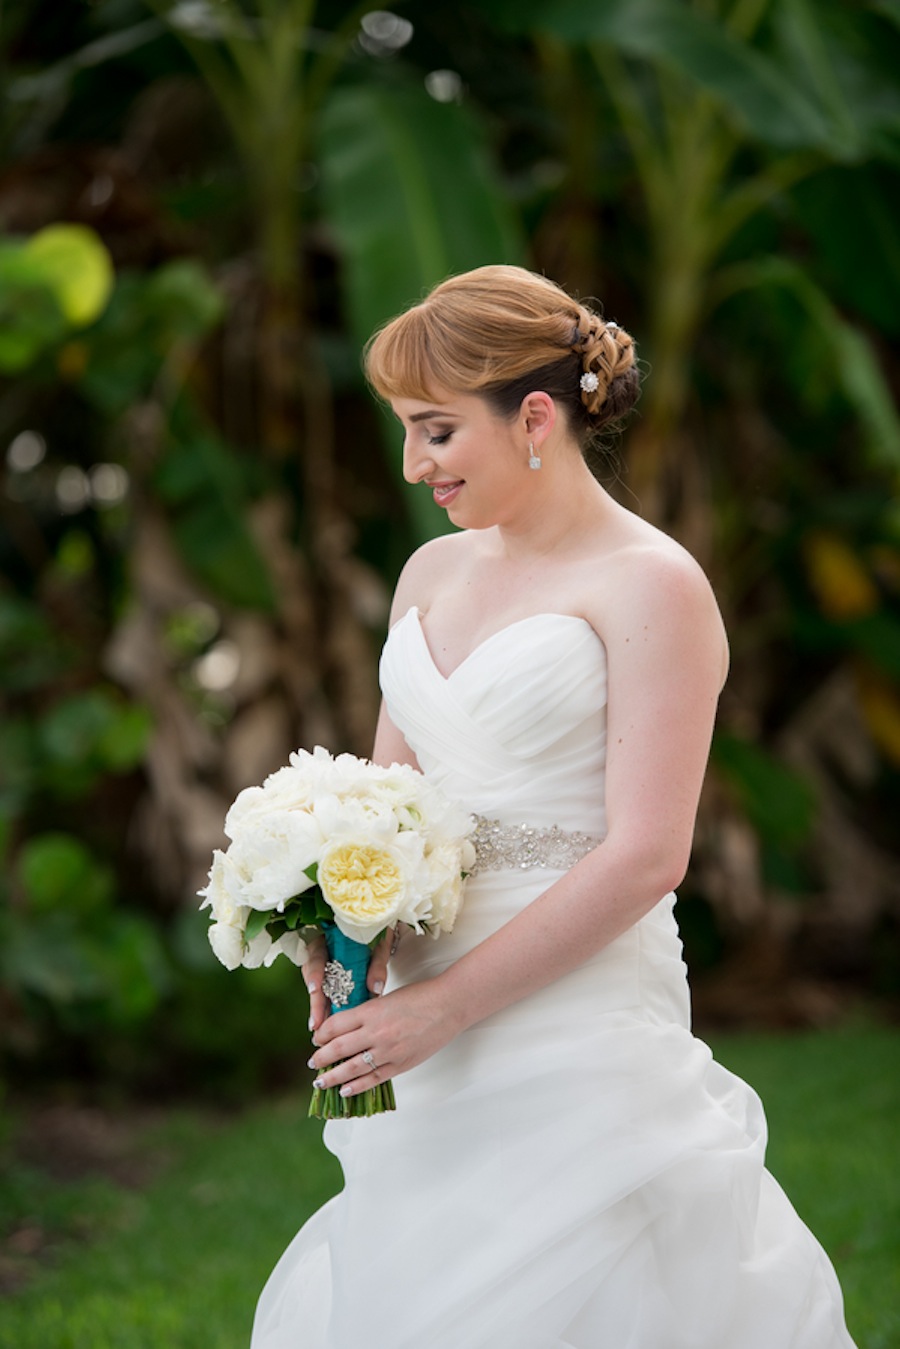 Outdoor Bridal Portrait Wearing Casablanca Bridal Wedding Dress with White Bouquet | The Bay Preserve at Osprey